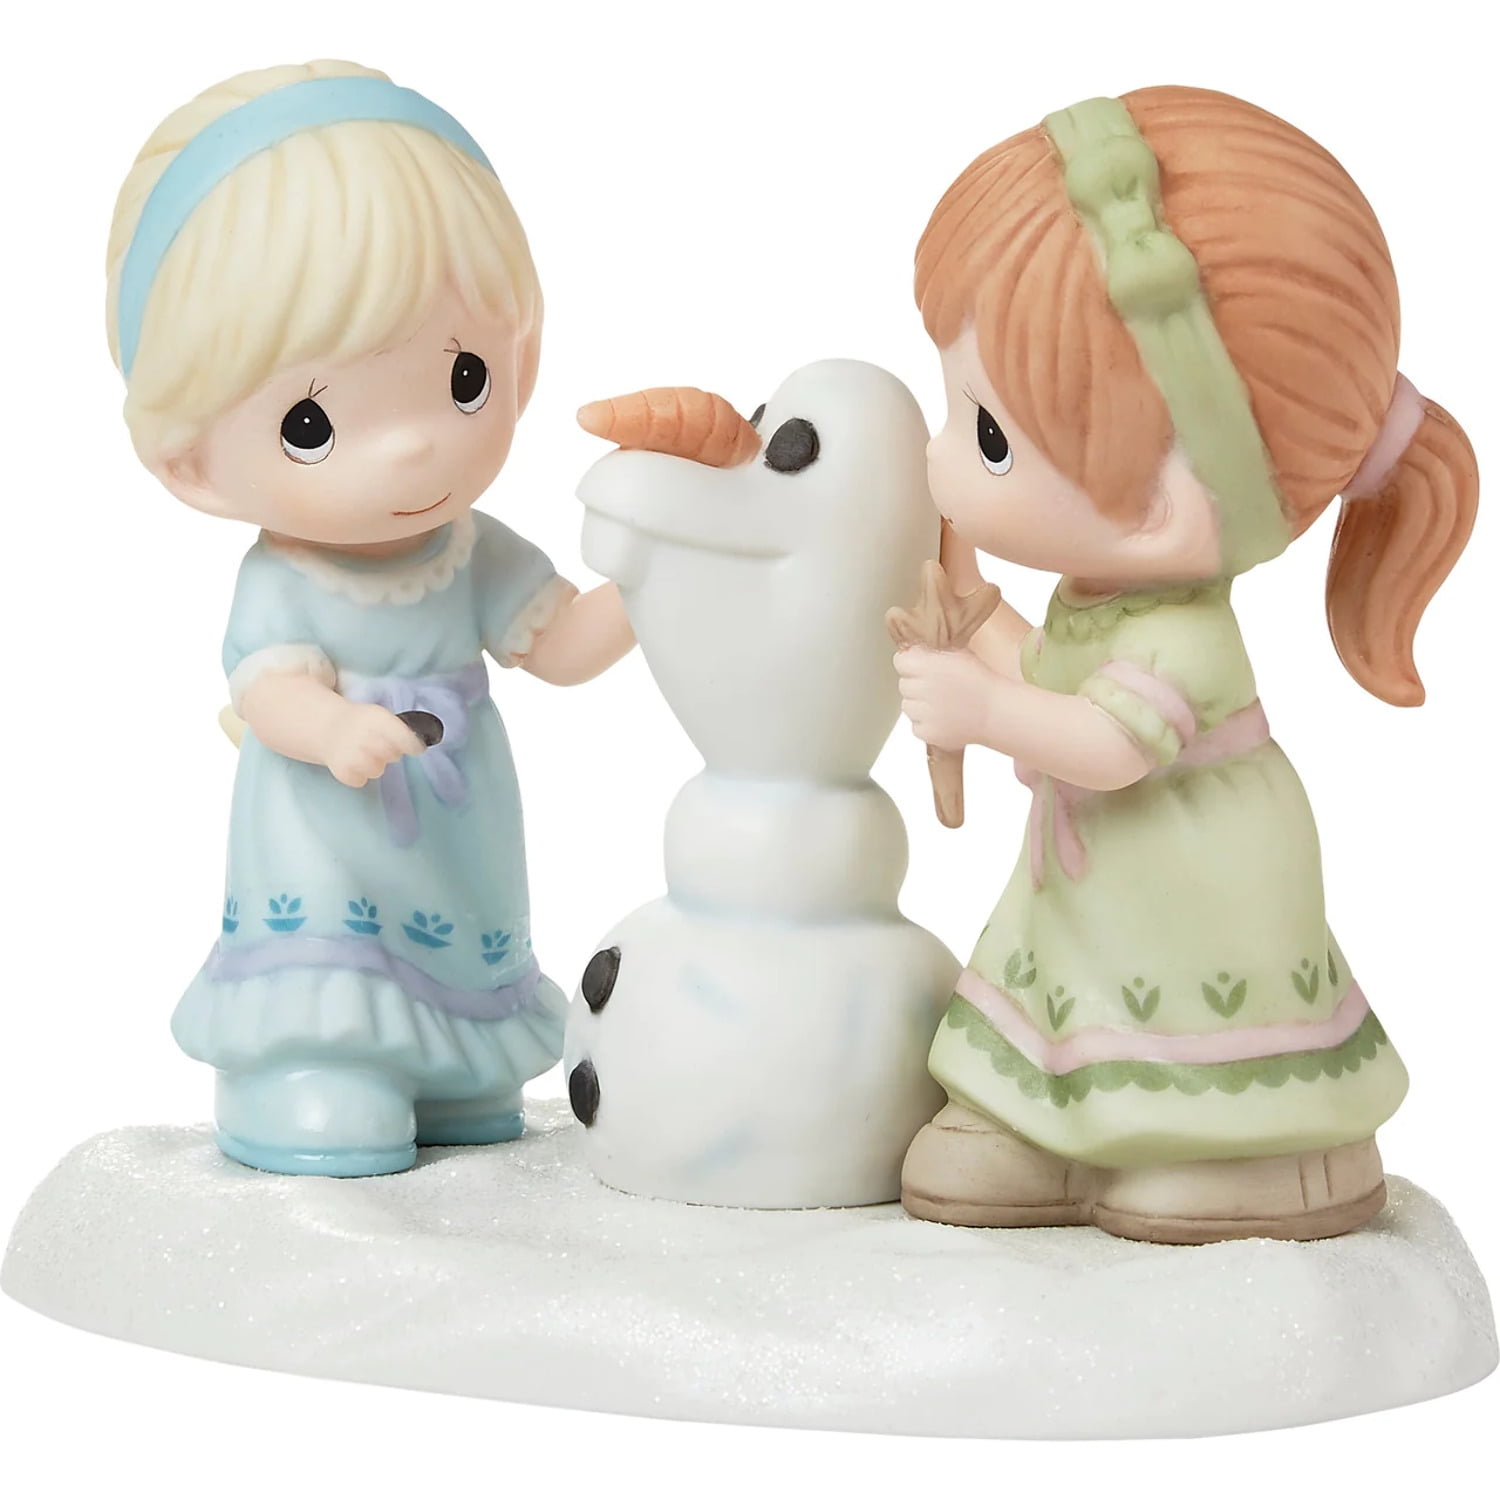 Do You Want To Build A Snowman? (Disney Frozen): Glass, Calliope